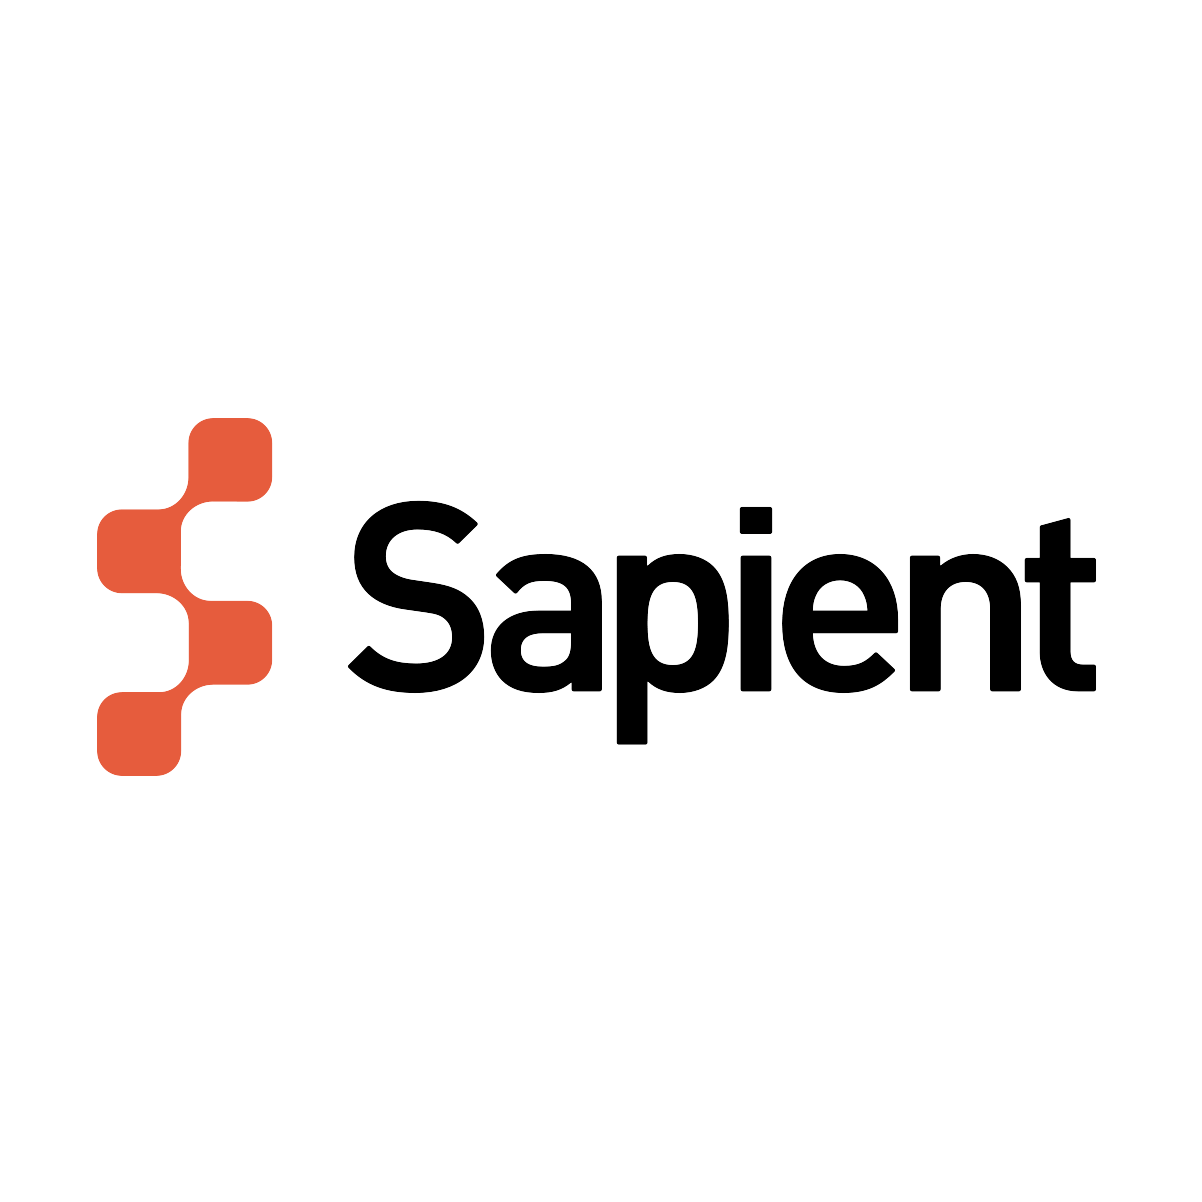 Sapient Creates Cloud-based Regulatory Compliance Solutions for Financial Services Industry Needs